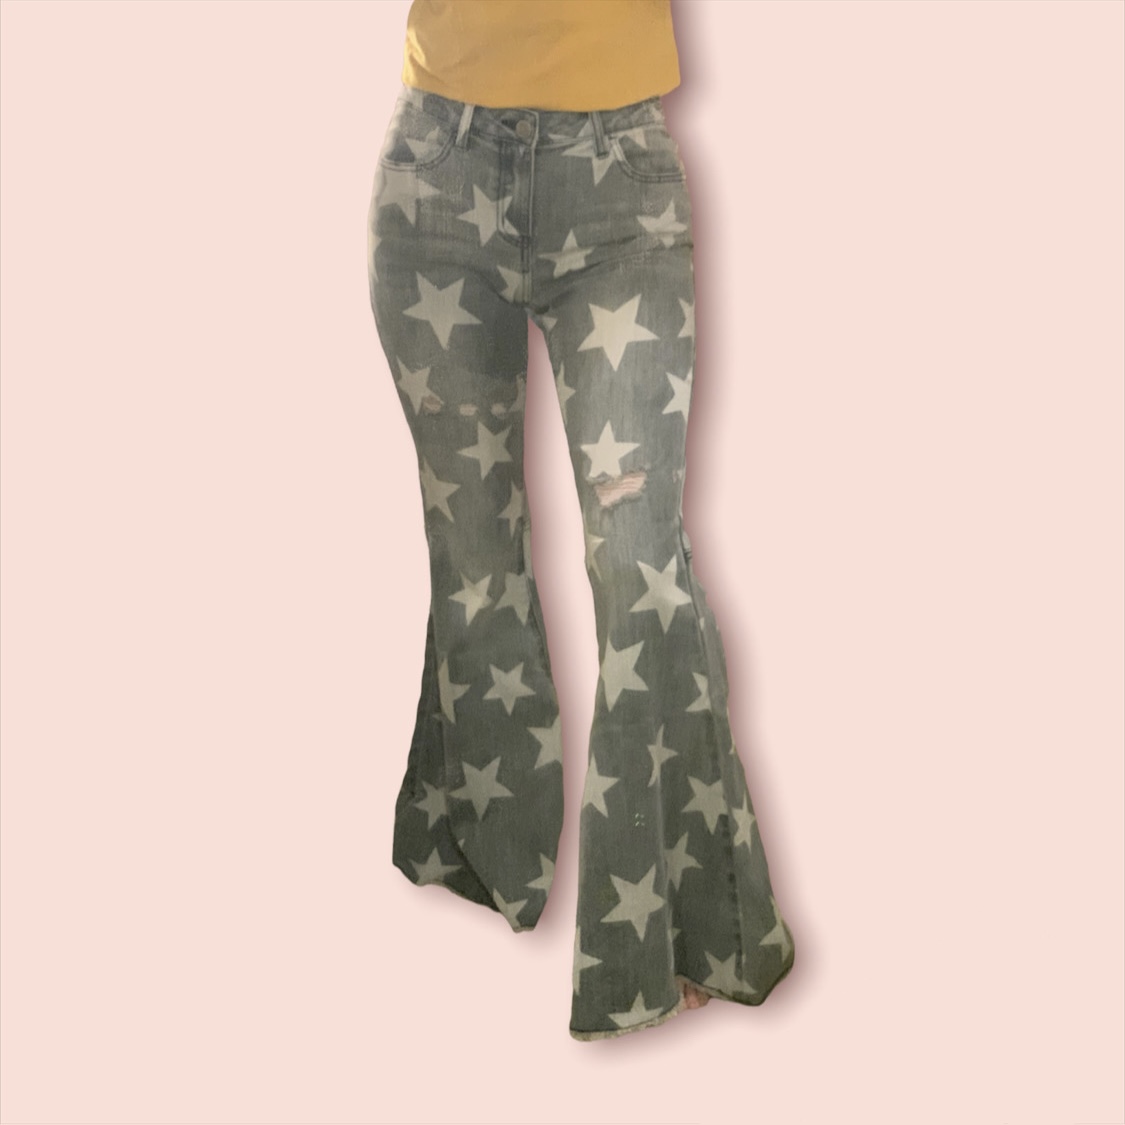 These flared denim pants are so fun and unique! If you love an outfit that stands out, then these are the pants for you!